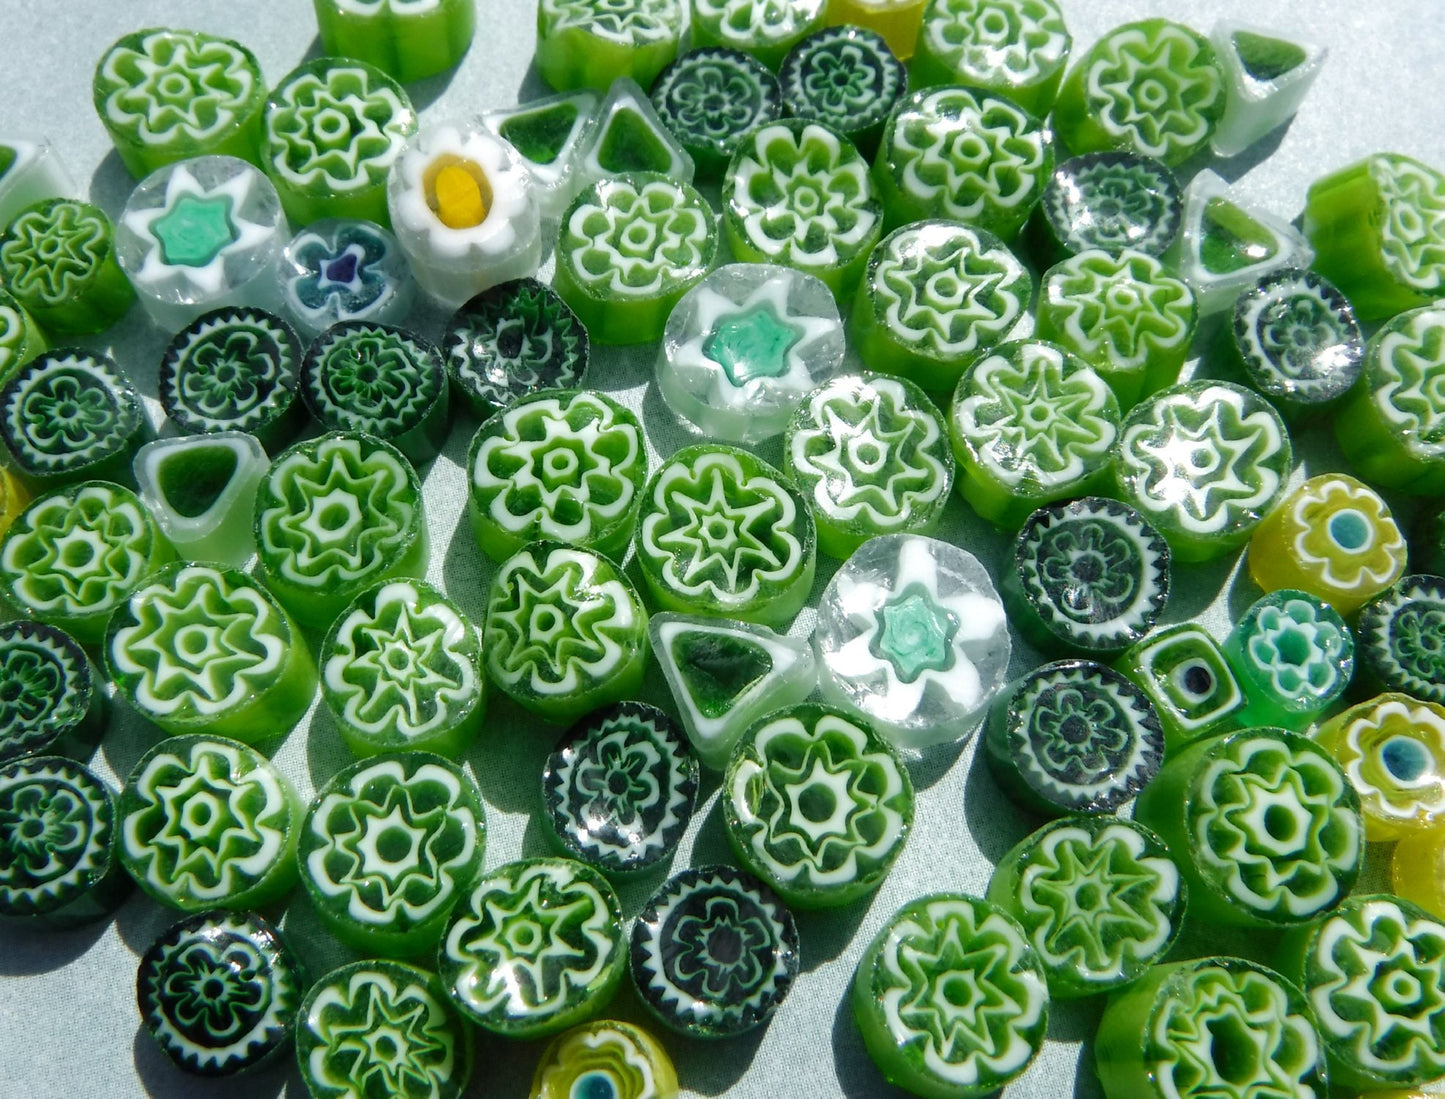 Green Millefiori - 25 grams - Unique Mosaic Glass Tiles - Mix of Different Patterns Shapes and Colors